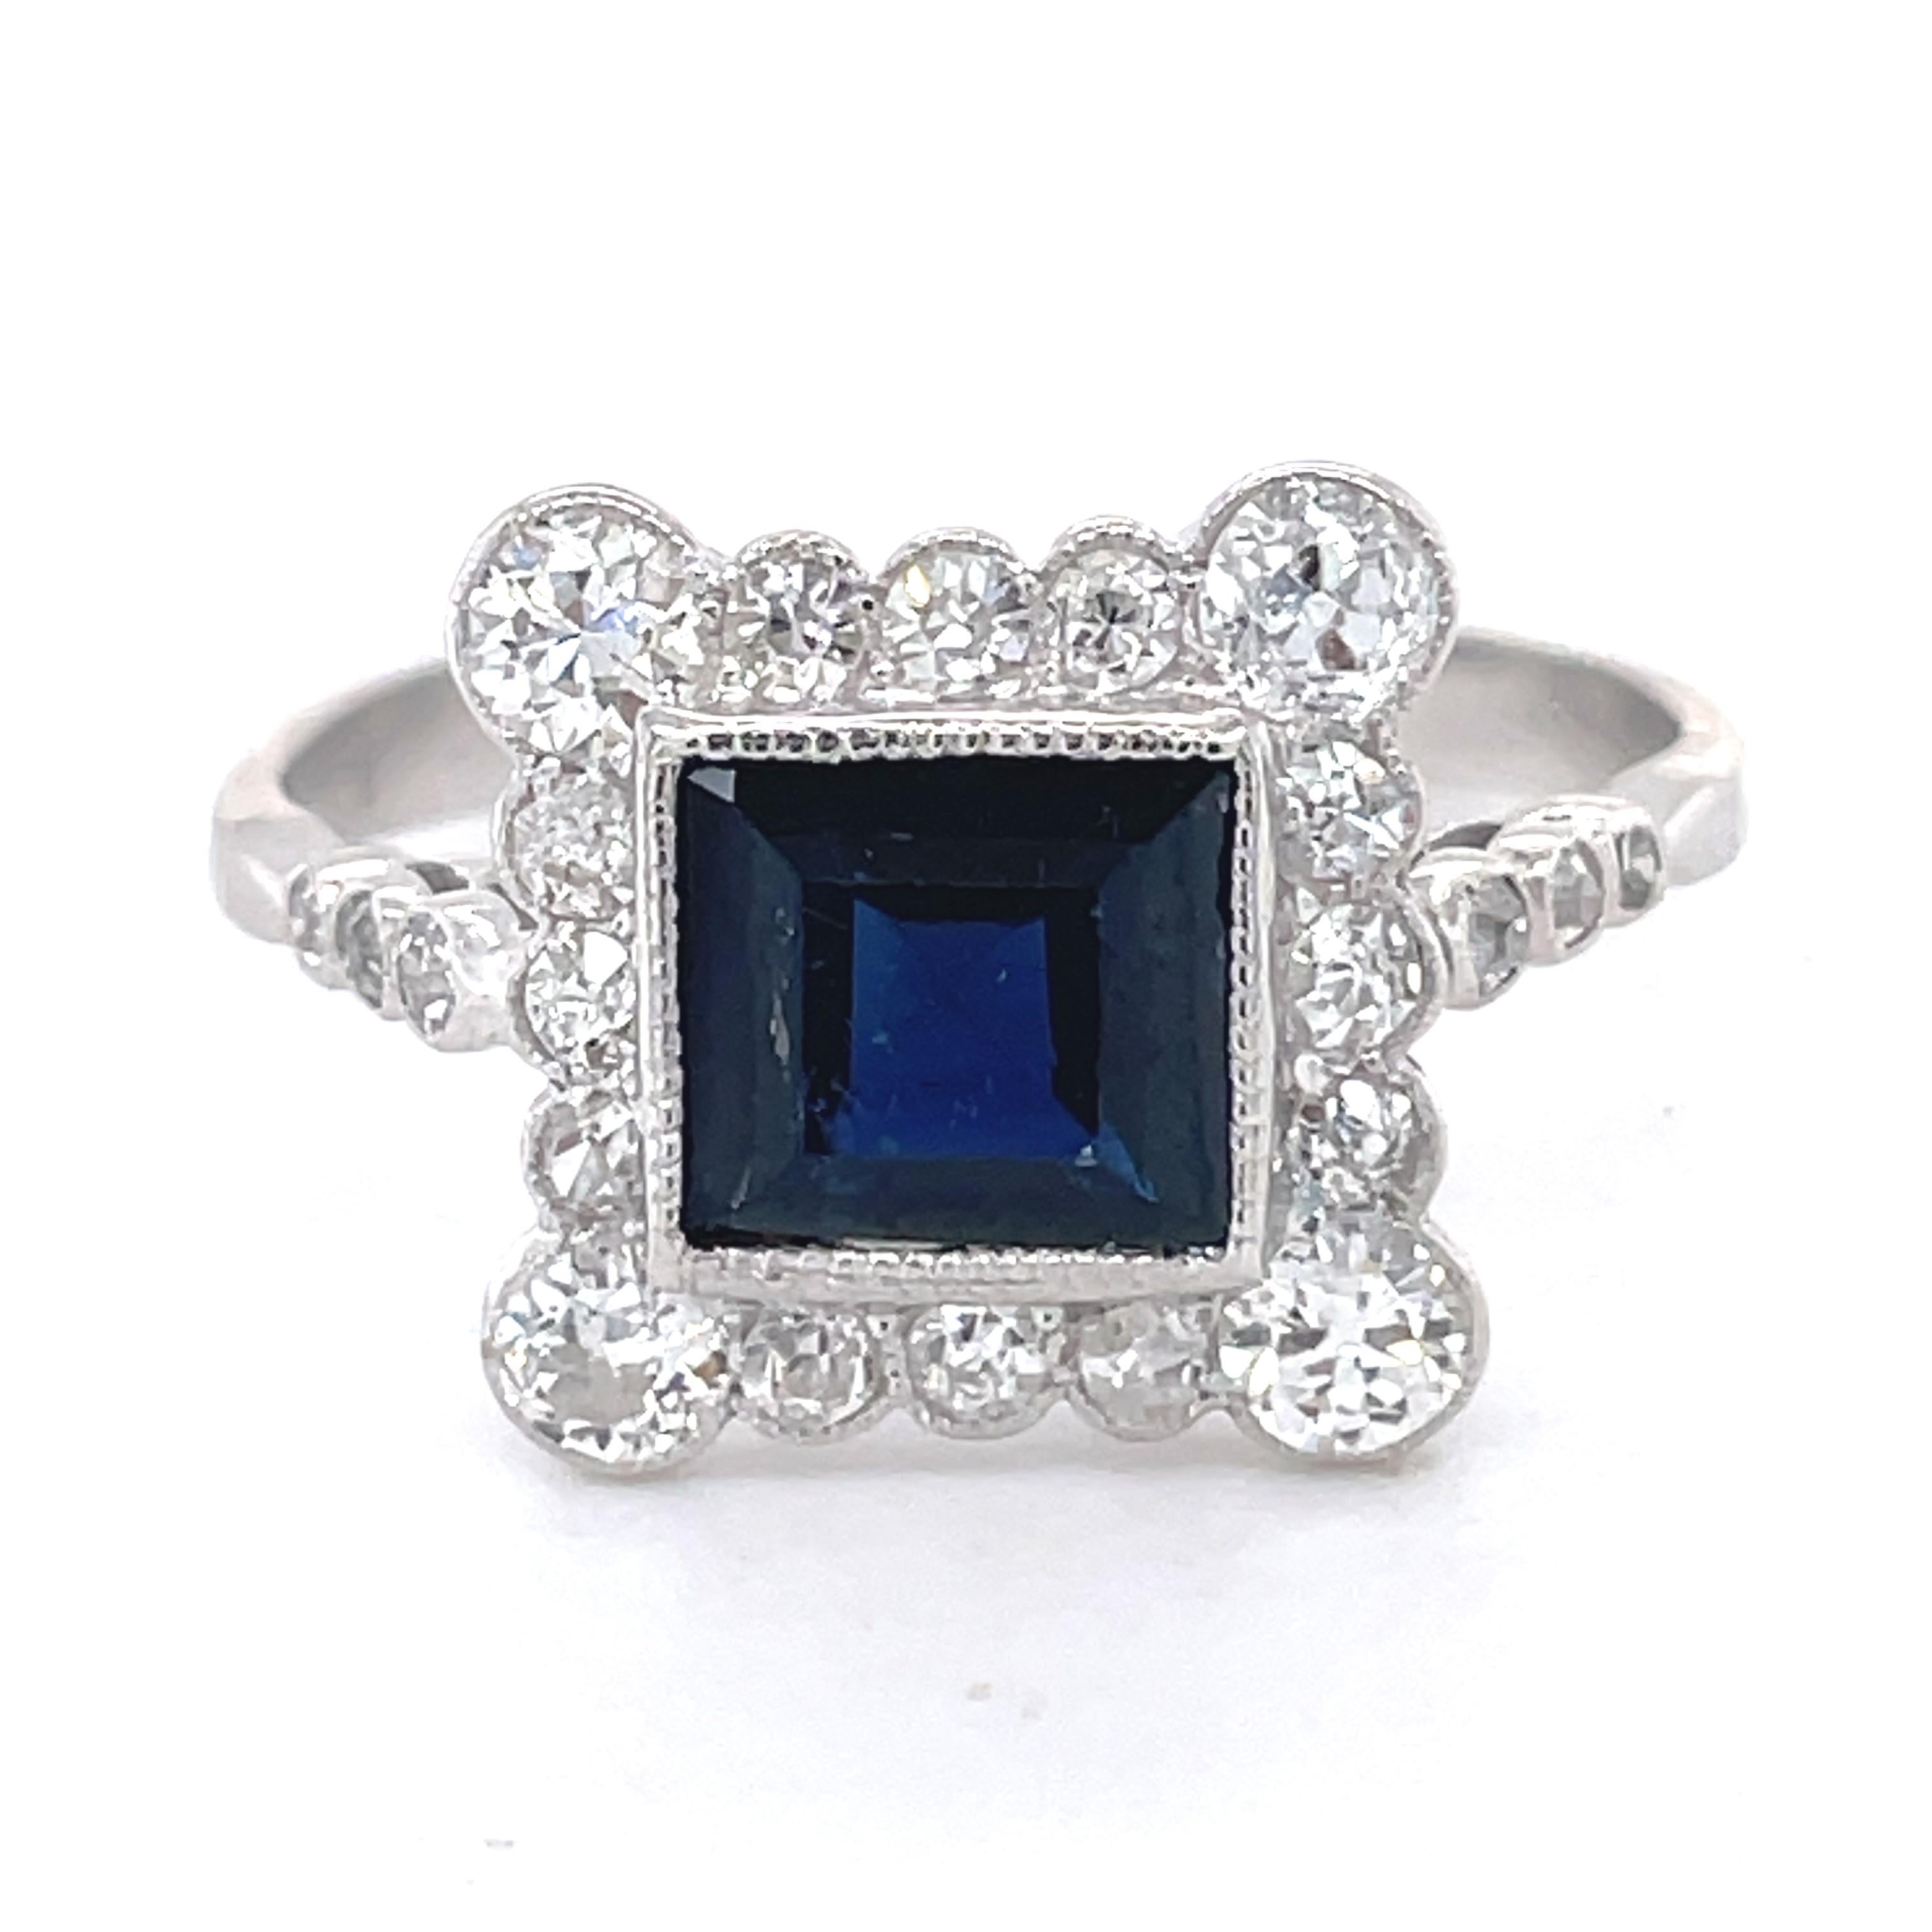 Jewelry Material: White Gold 18k (the gold has been tested by a professional)
Total Carat Weight:2.5 ct (Approx.)
Total Metal Weight:4.31 g
Size: 9 US \  18.89 Diameter mm (inner diameter)

Grading Results:
Stone Type: Sapphire
Shape: square